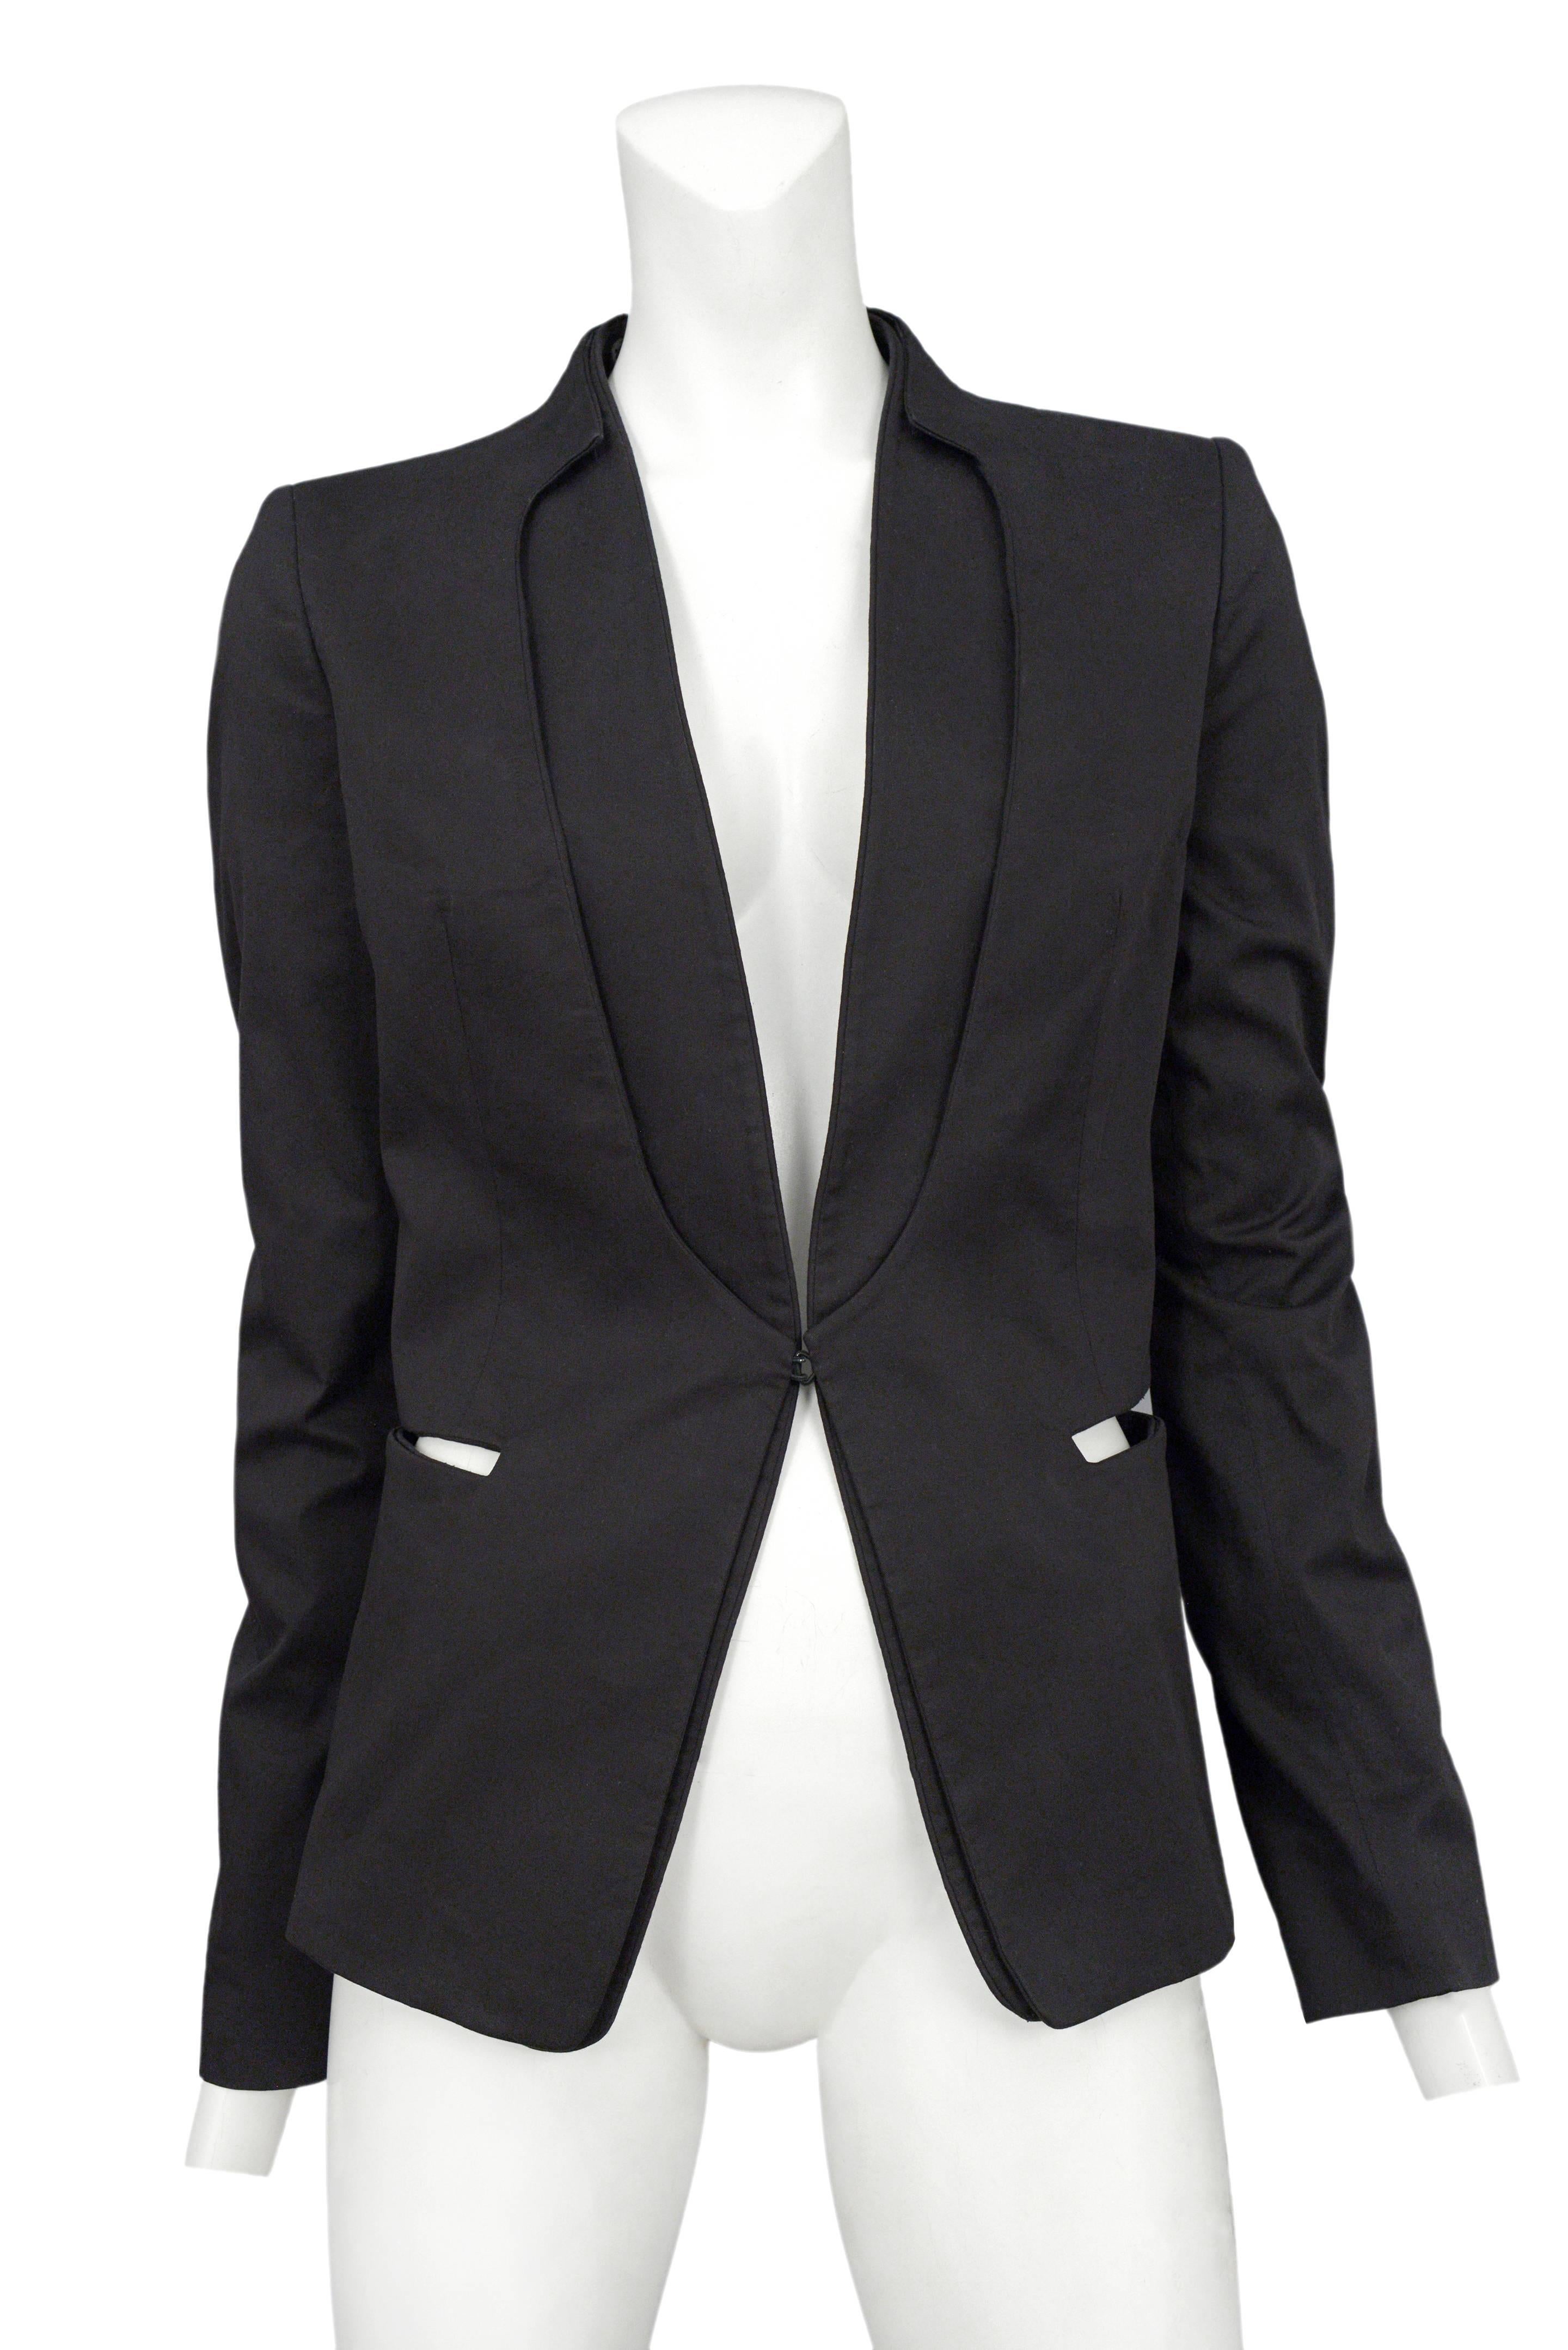 Vintage Maison Martin Margiela black blazer featuring a removable collar, hook and eye closure and cutout hip pockets.
Please inquire for additional images.